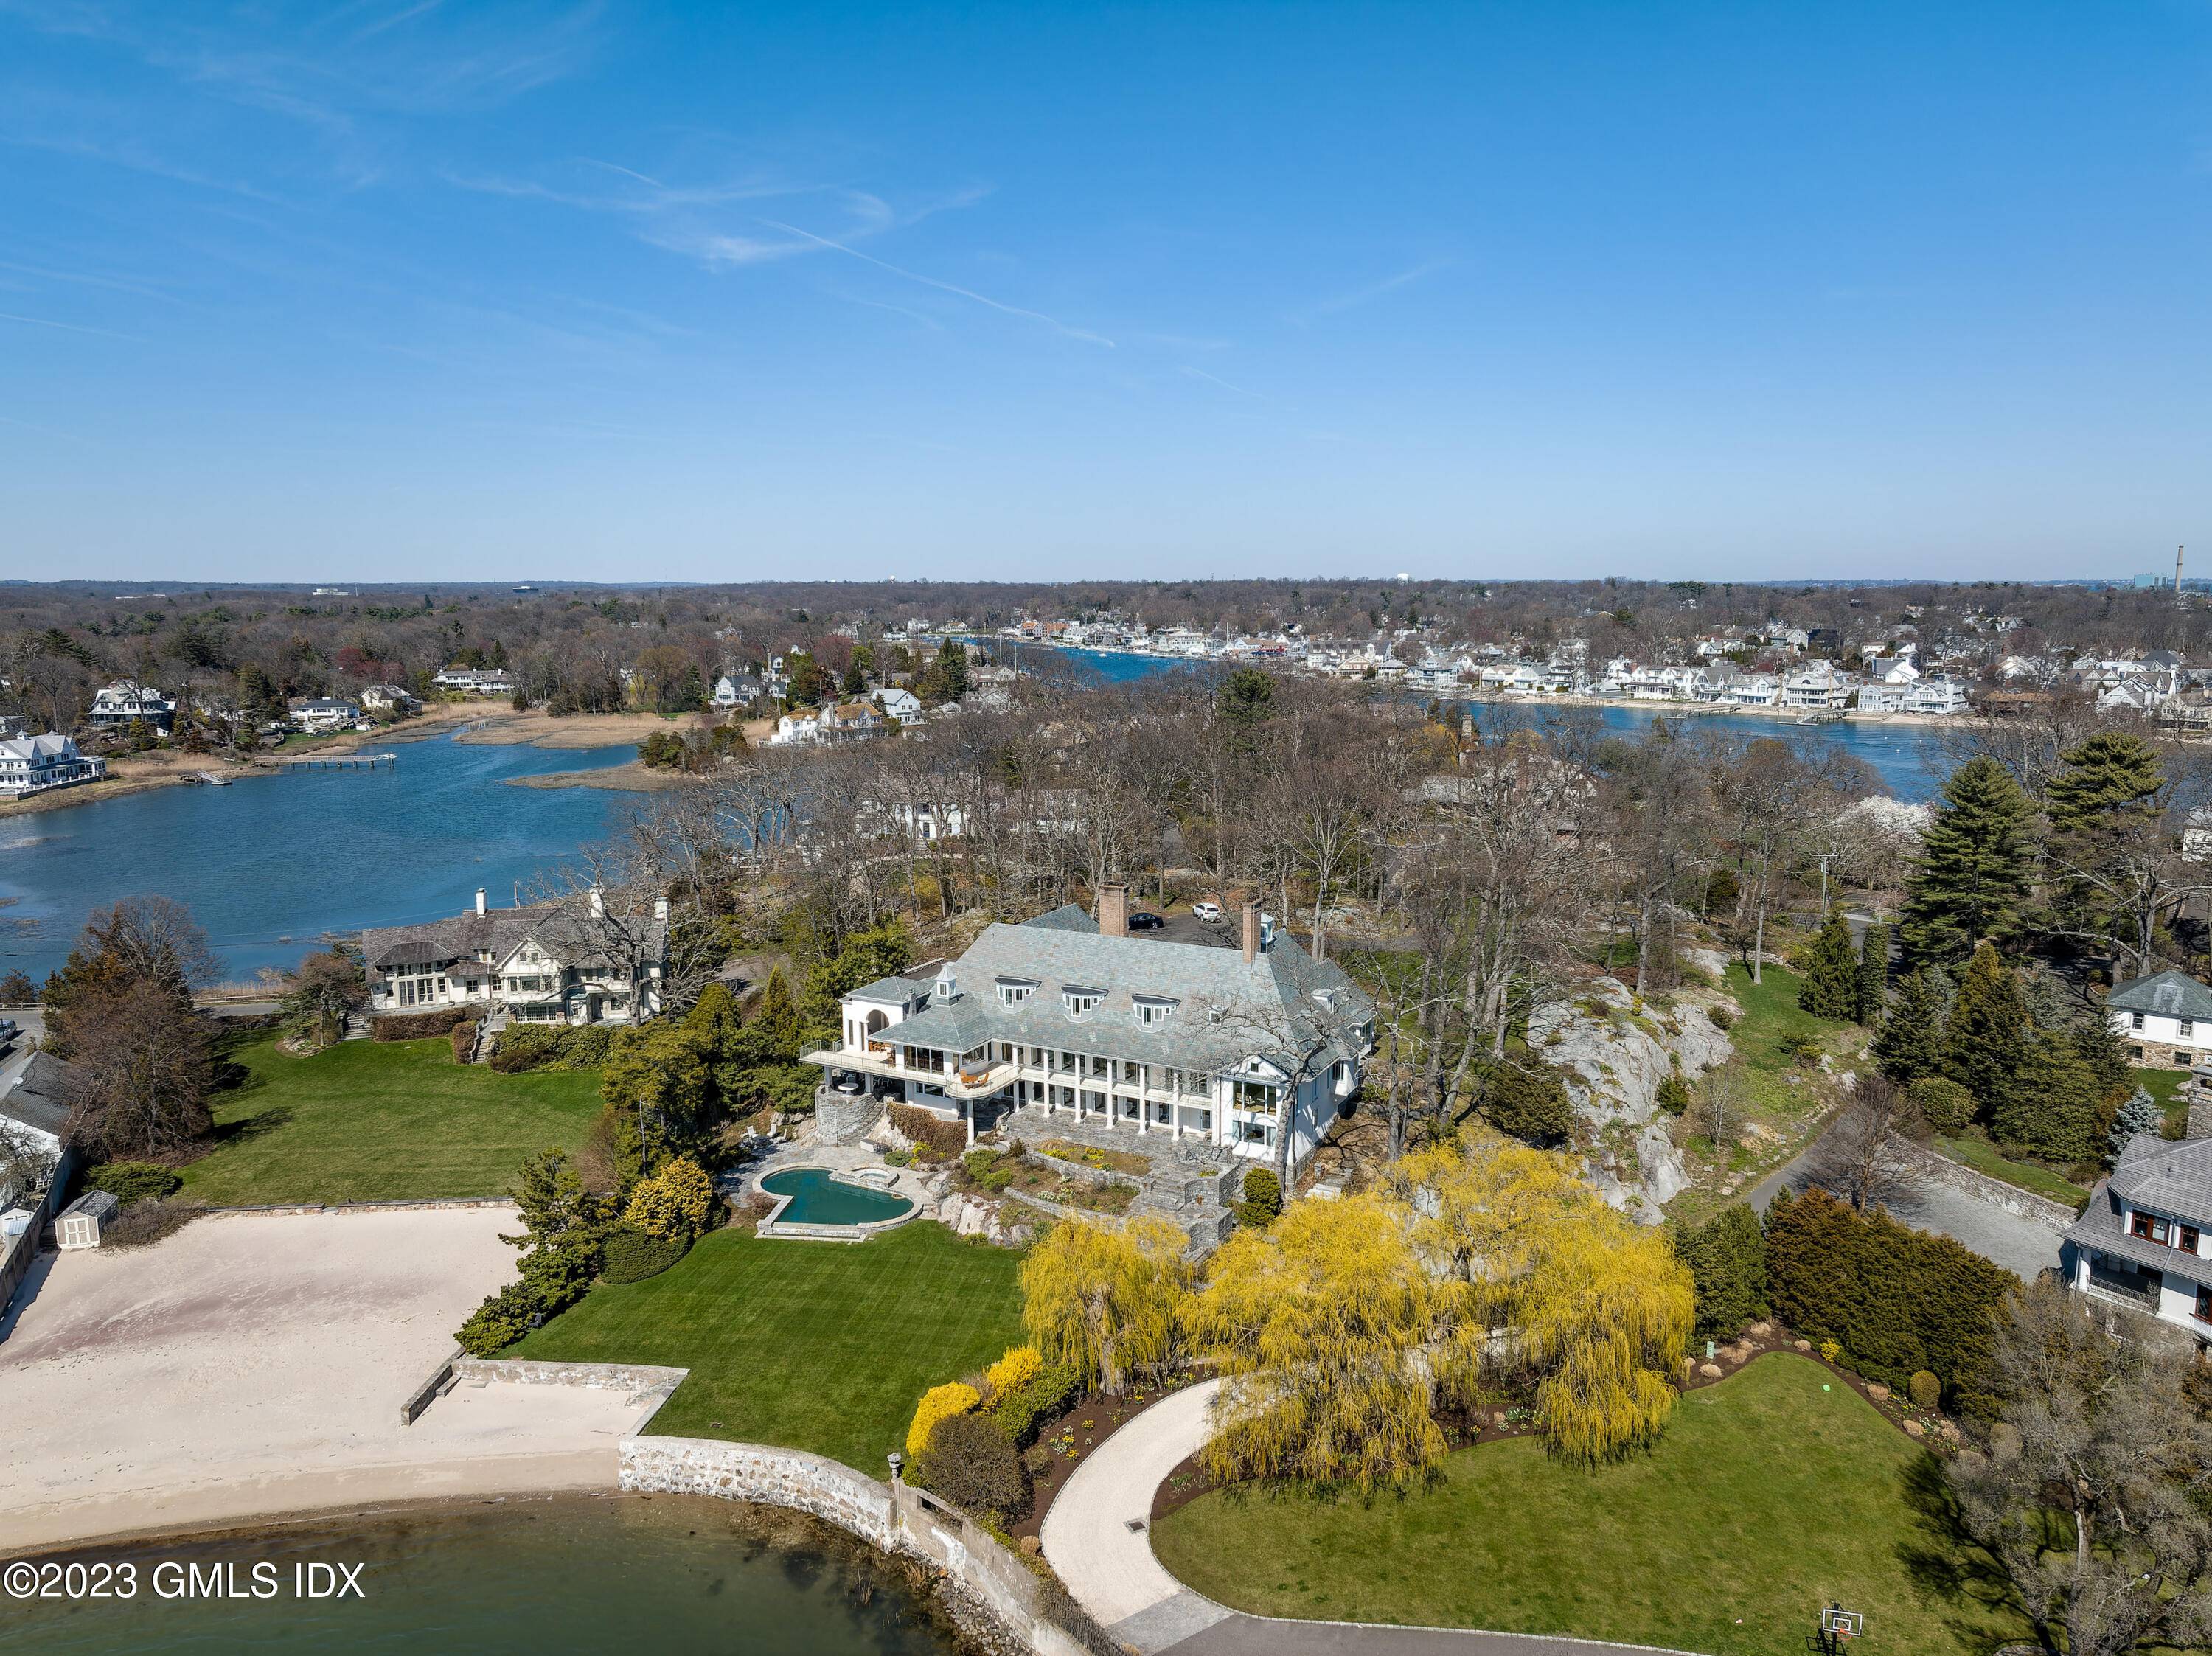 Overlooking Long Island Sound from a natural 32ft stone bluff high above the sea, with 2.